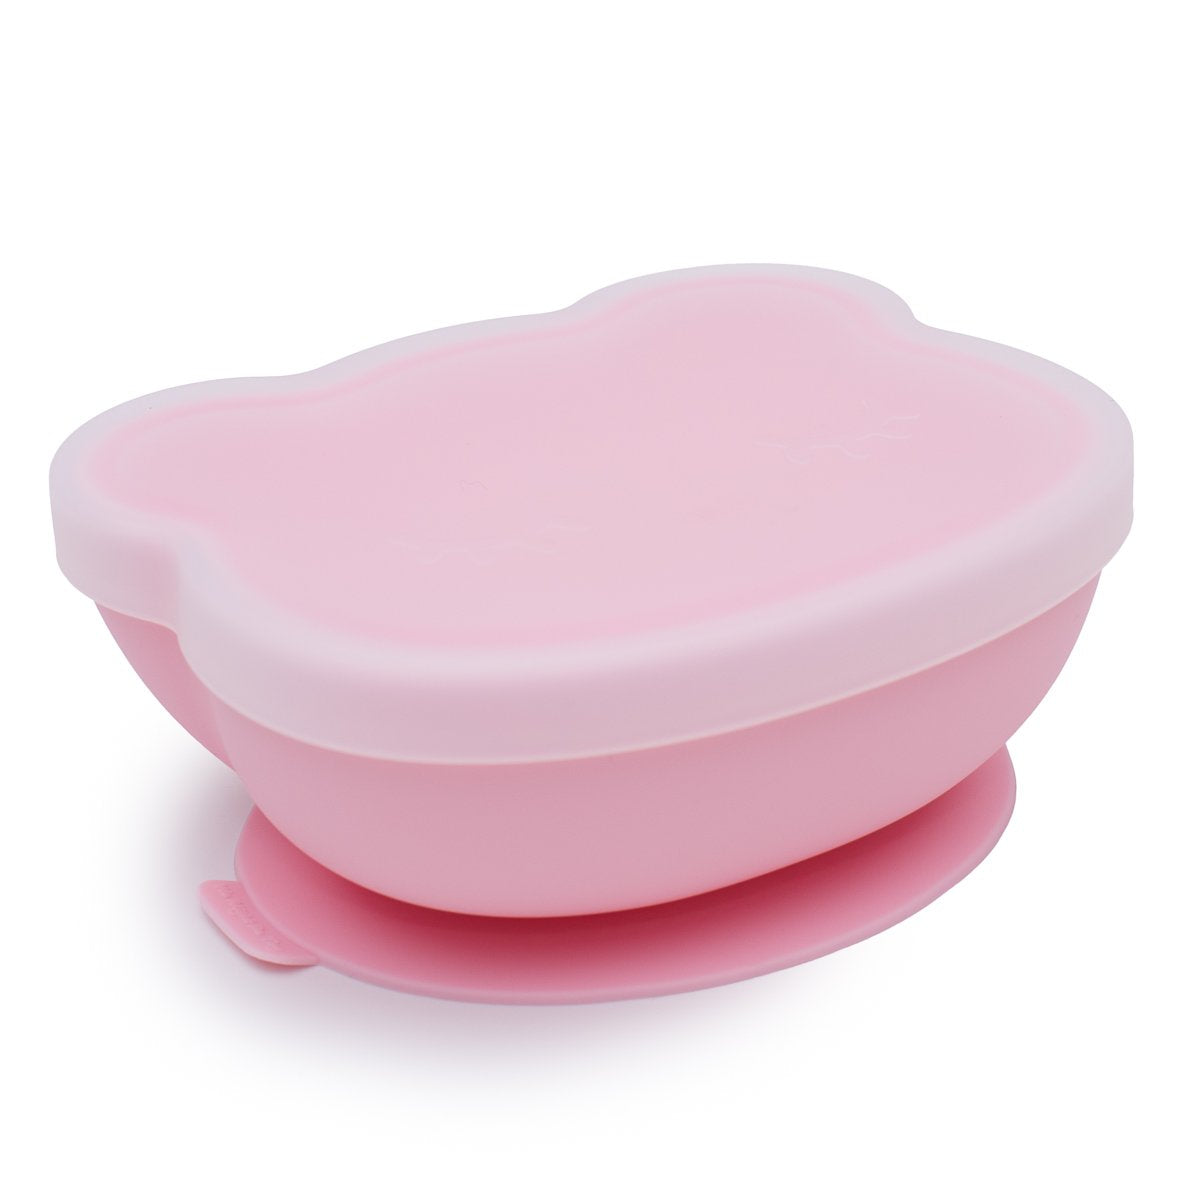 Bear Stickie Bowl with Lid - Powder Pink - Little Reef and Friends